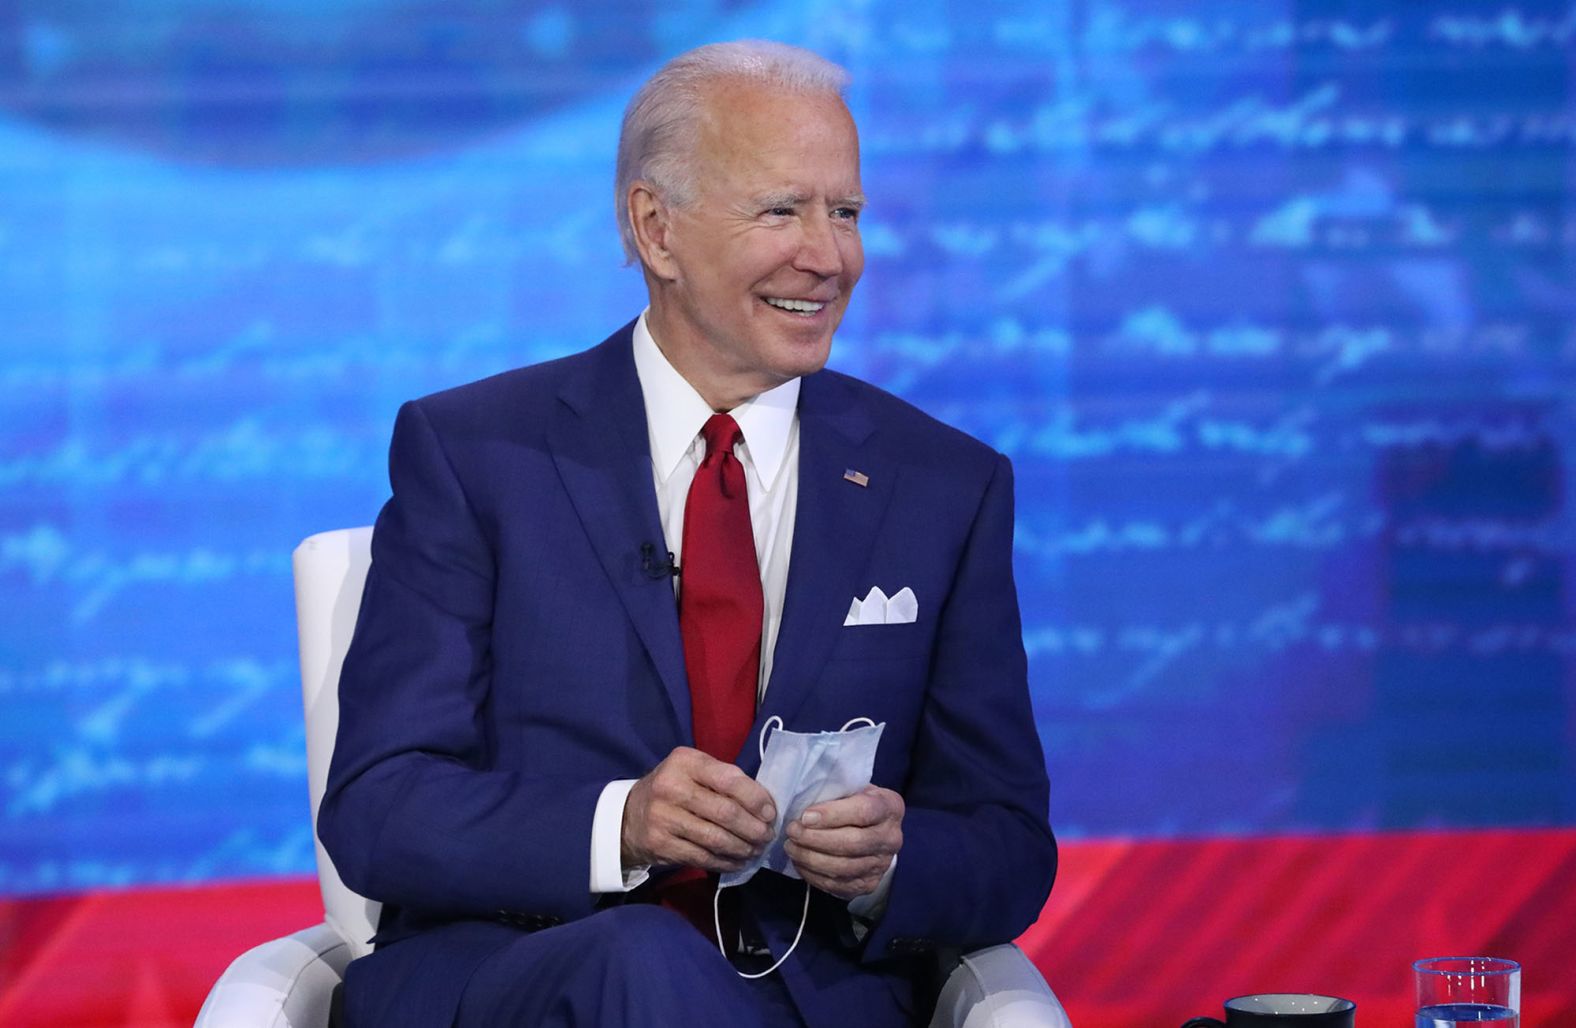 Biden spoke in measured tones during his more policy-heavy event. There was a <a href="index.php?page=&url=https%3A%2F%2Fwww.cnn.com%2F2020%2F10%2F15%2Fpolitics%2Fnbc-abc-dueling-town-halls%2Findex.html" target="_blank">stark contrast</a> between his town hall and Trump's. From the very beginning of Trump's town hall, the President was an antagonistic participant, interrupting and criticizing the premise of questions from Guthrie — sometimes before she had even finished asking them.